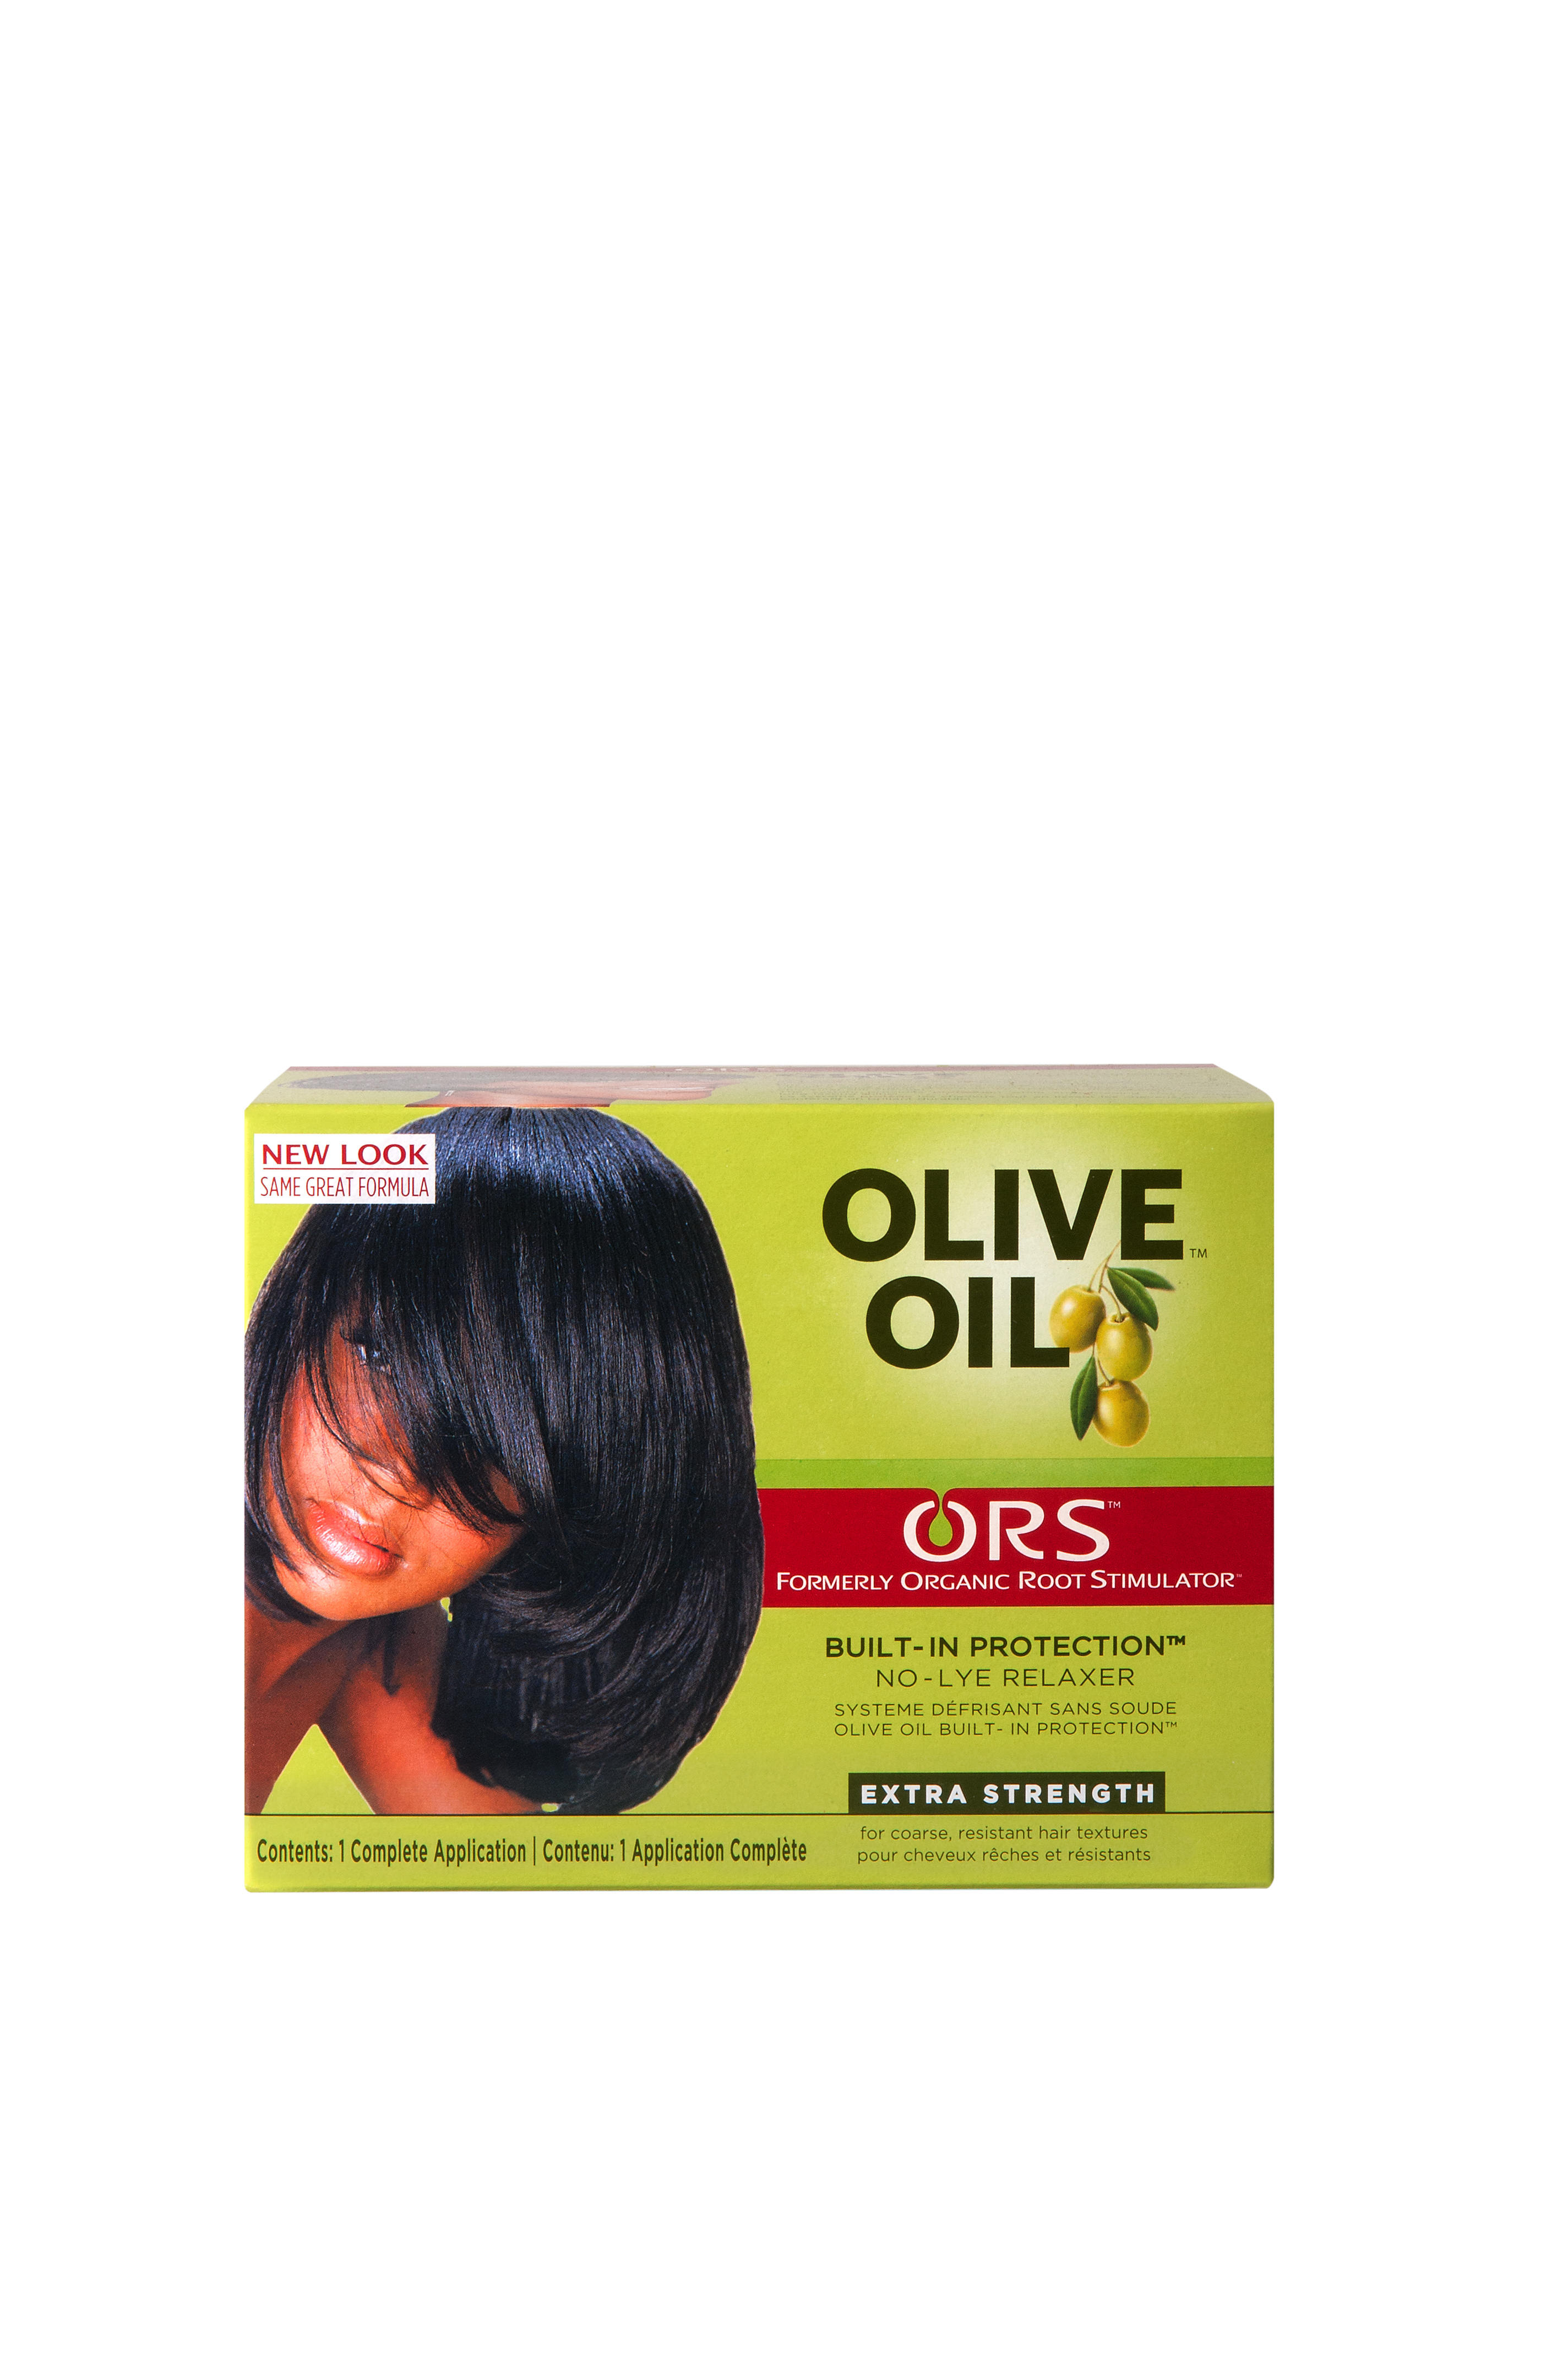 Organic Root Stimulator Relaxer, Olive Oil, No-Lye, Extra Strength, 1 application